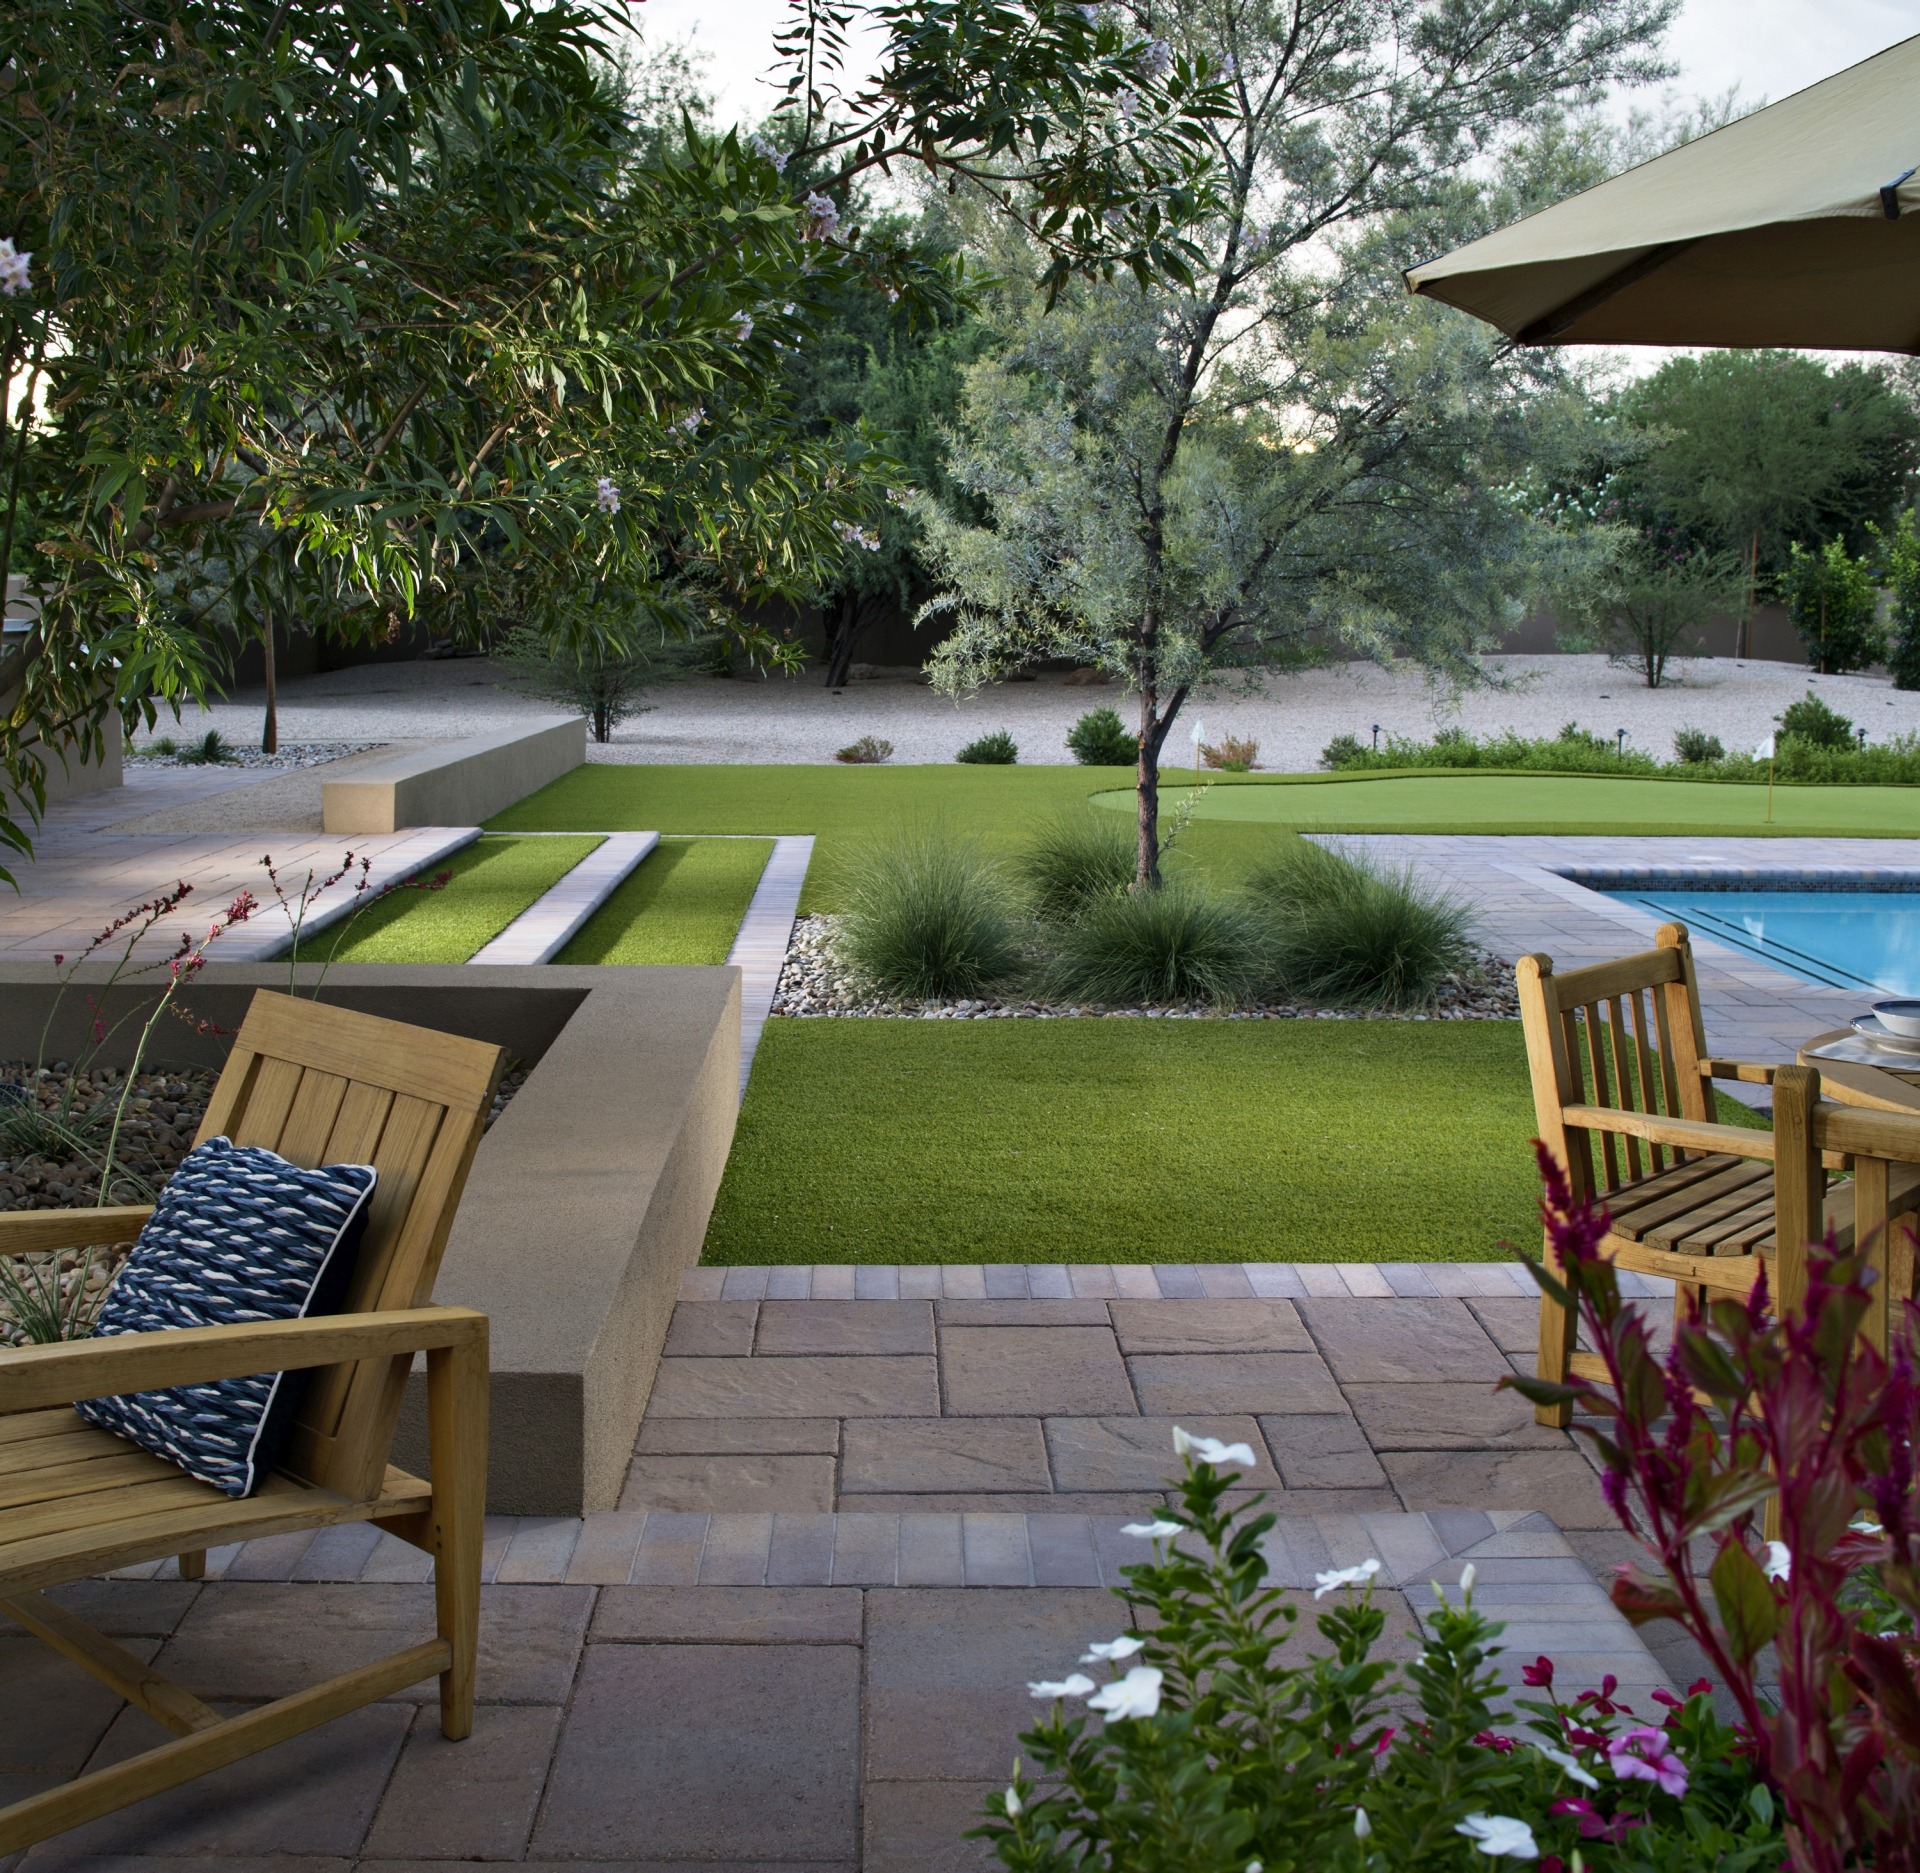 Low Maintenance Landscaping For Large, Landscaping A Large Backyard On Budget